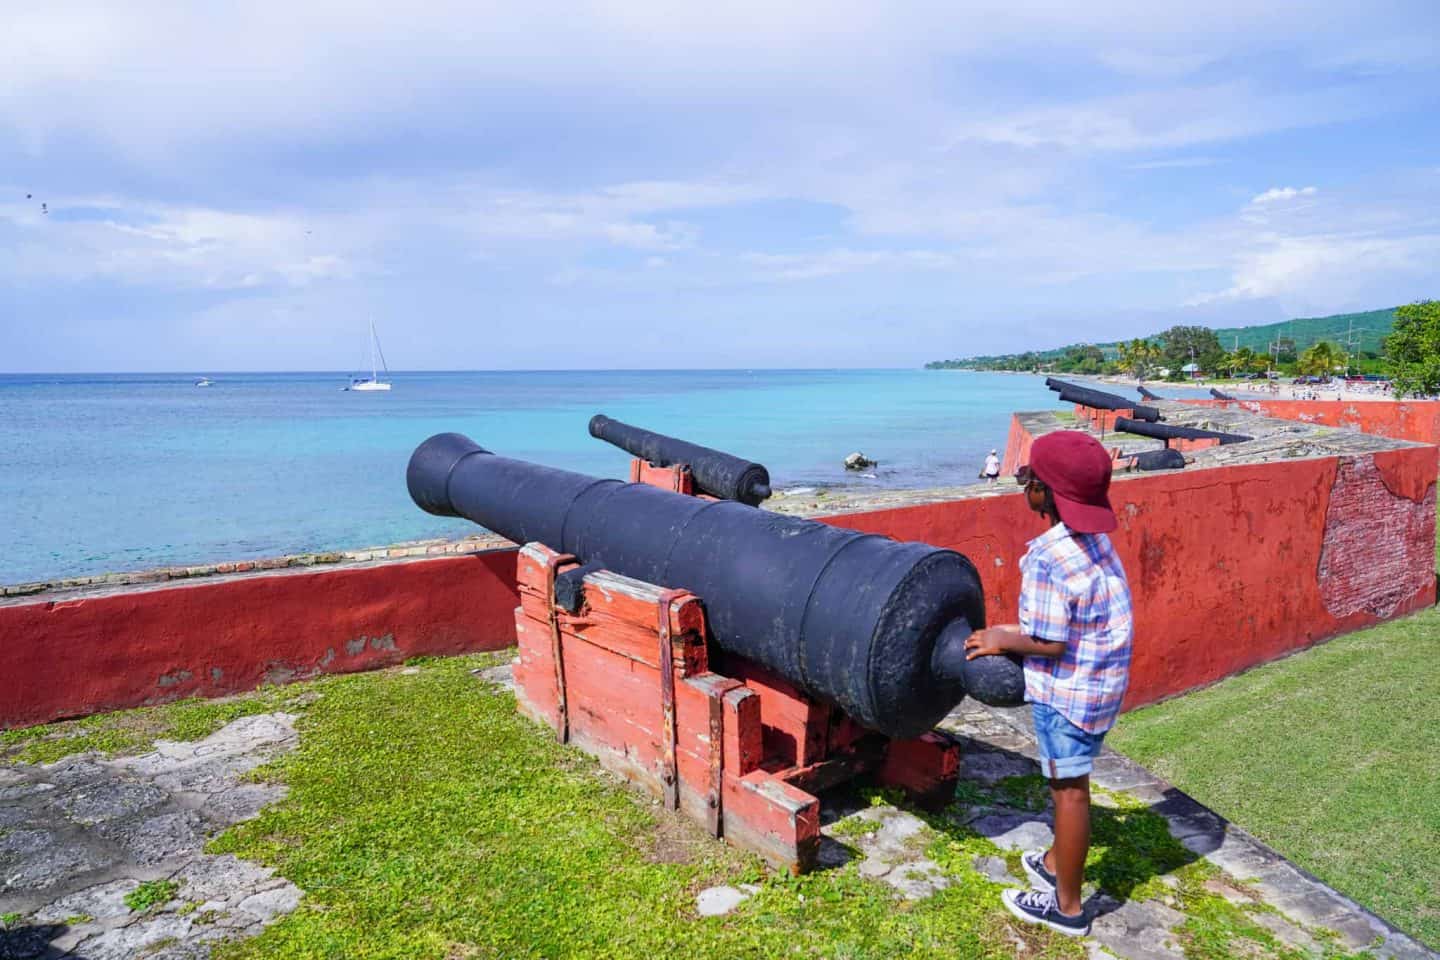 Black Family Travel Things To Do In St Croix Black Family Travel Black Travelers Black Kids Travel Black Family Traveling The World Black Worldschoolers African American Family 172